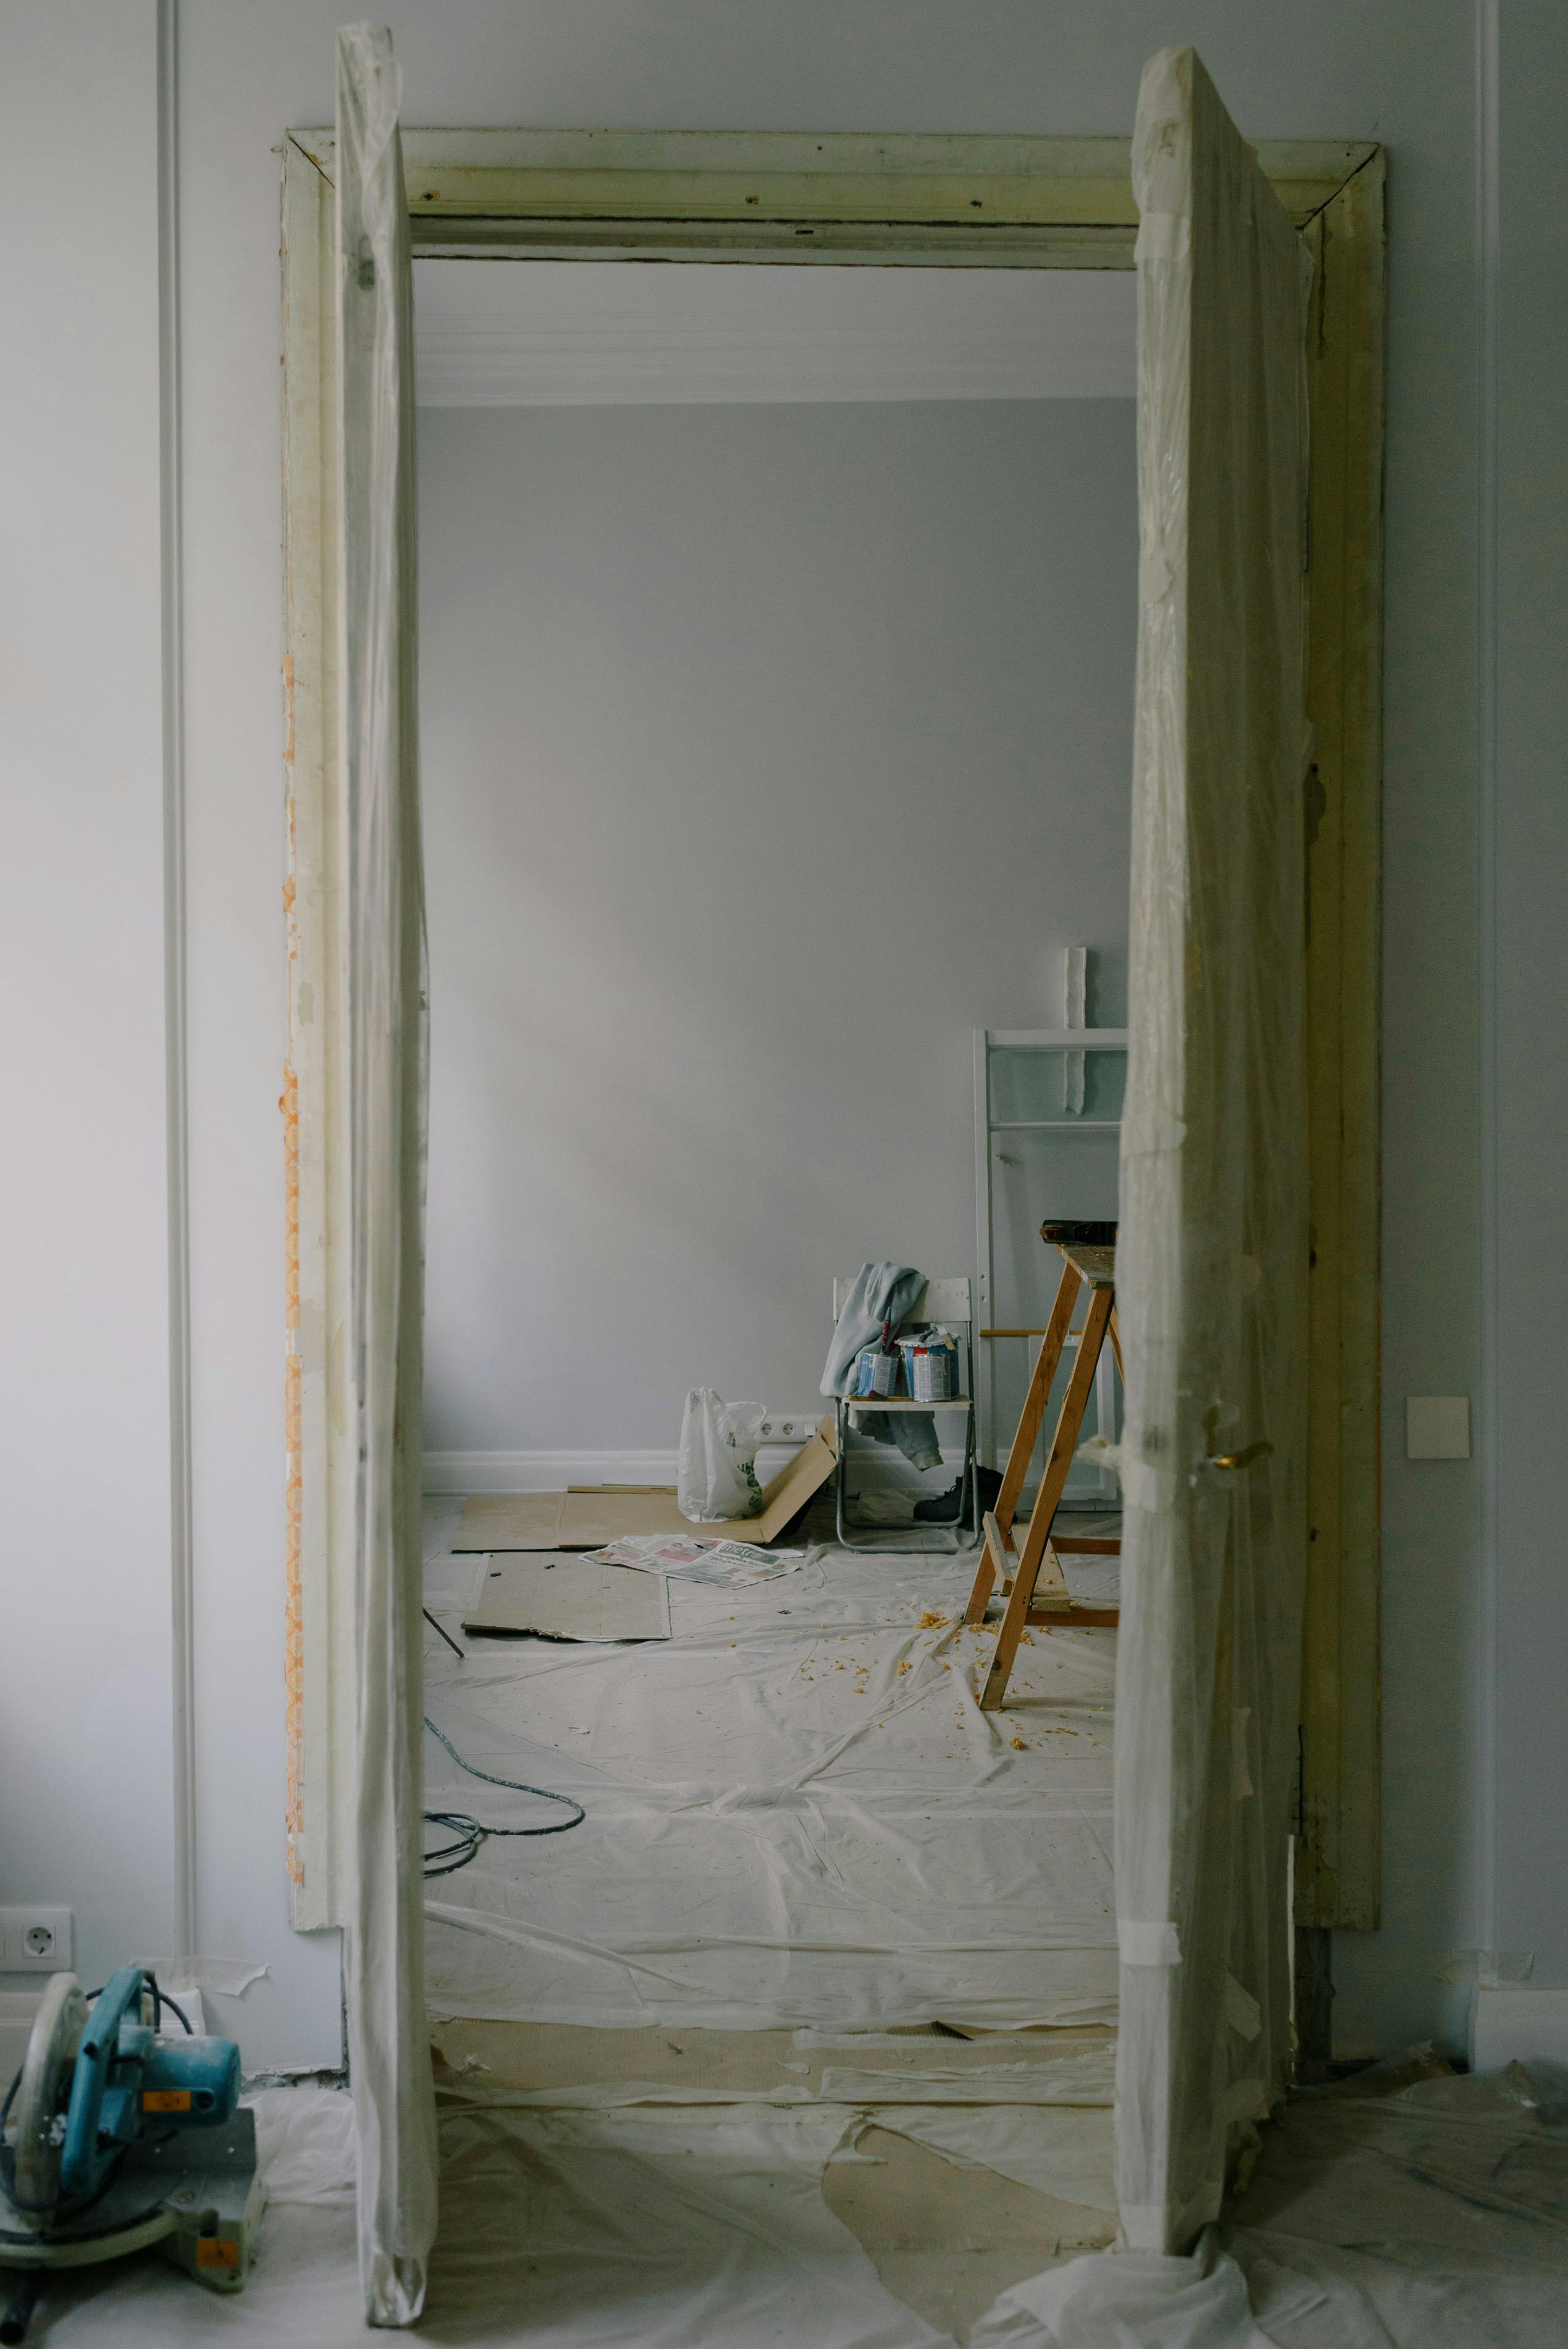 A house being renovated | Source: Pexels